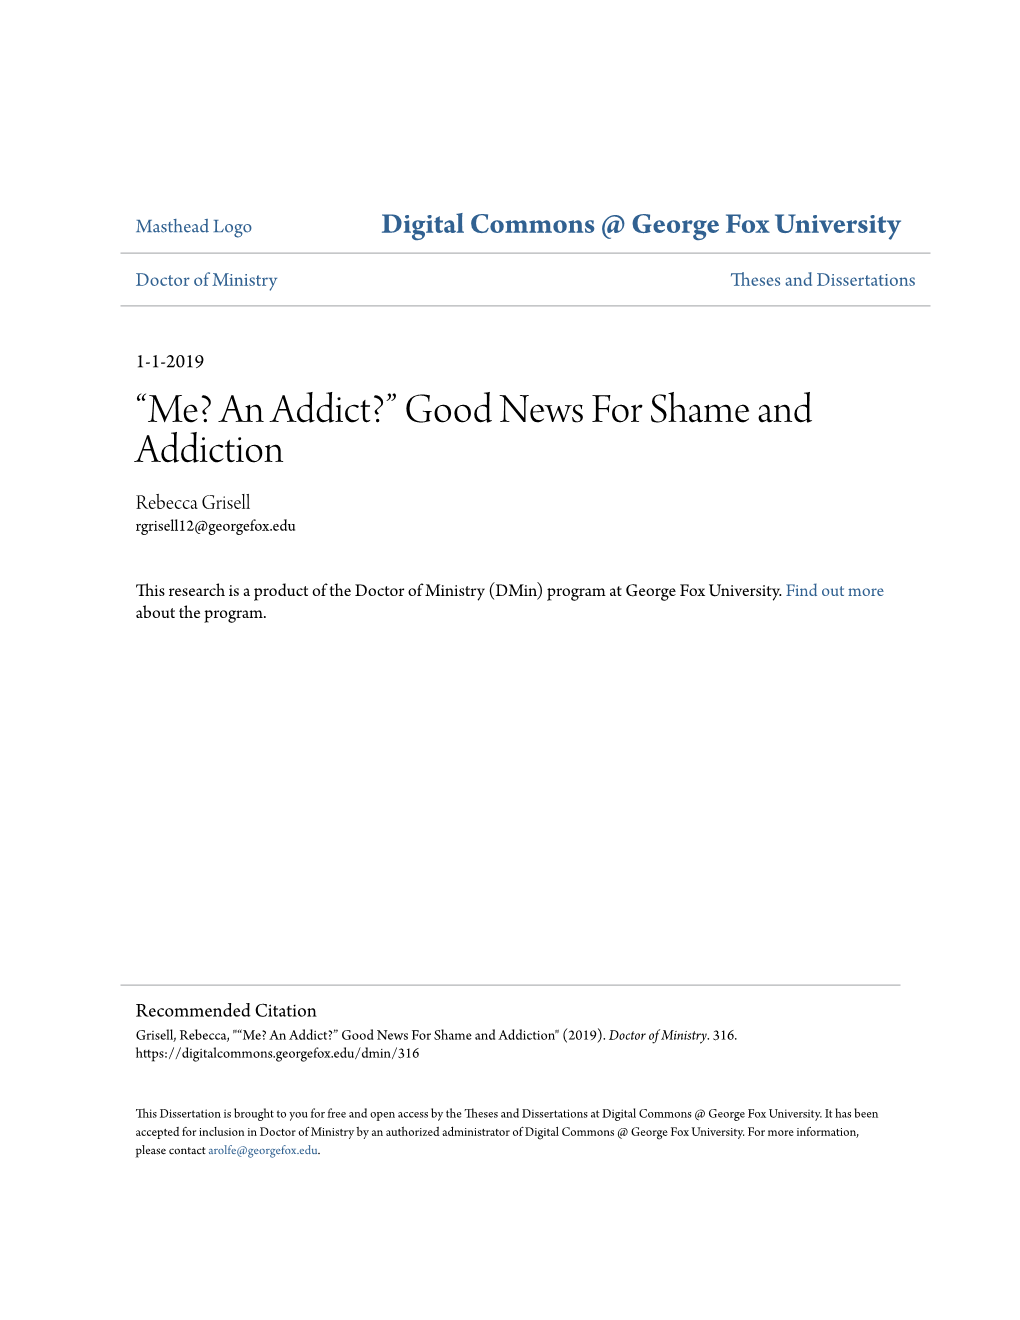 Good News for Shame and Addiction Rebecca Grisell Rgrisell12@Georgefox.Edu